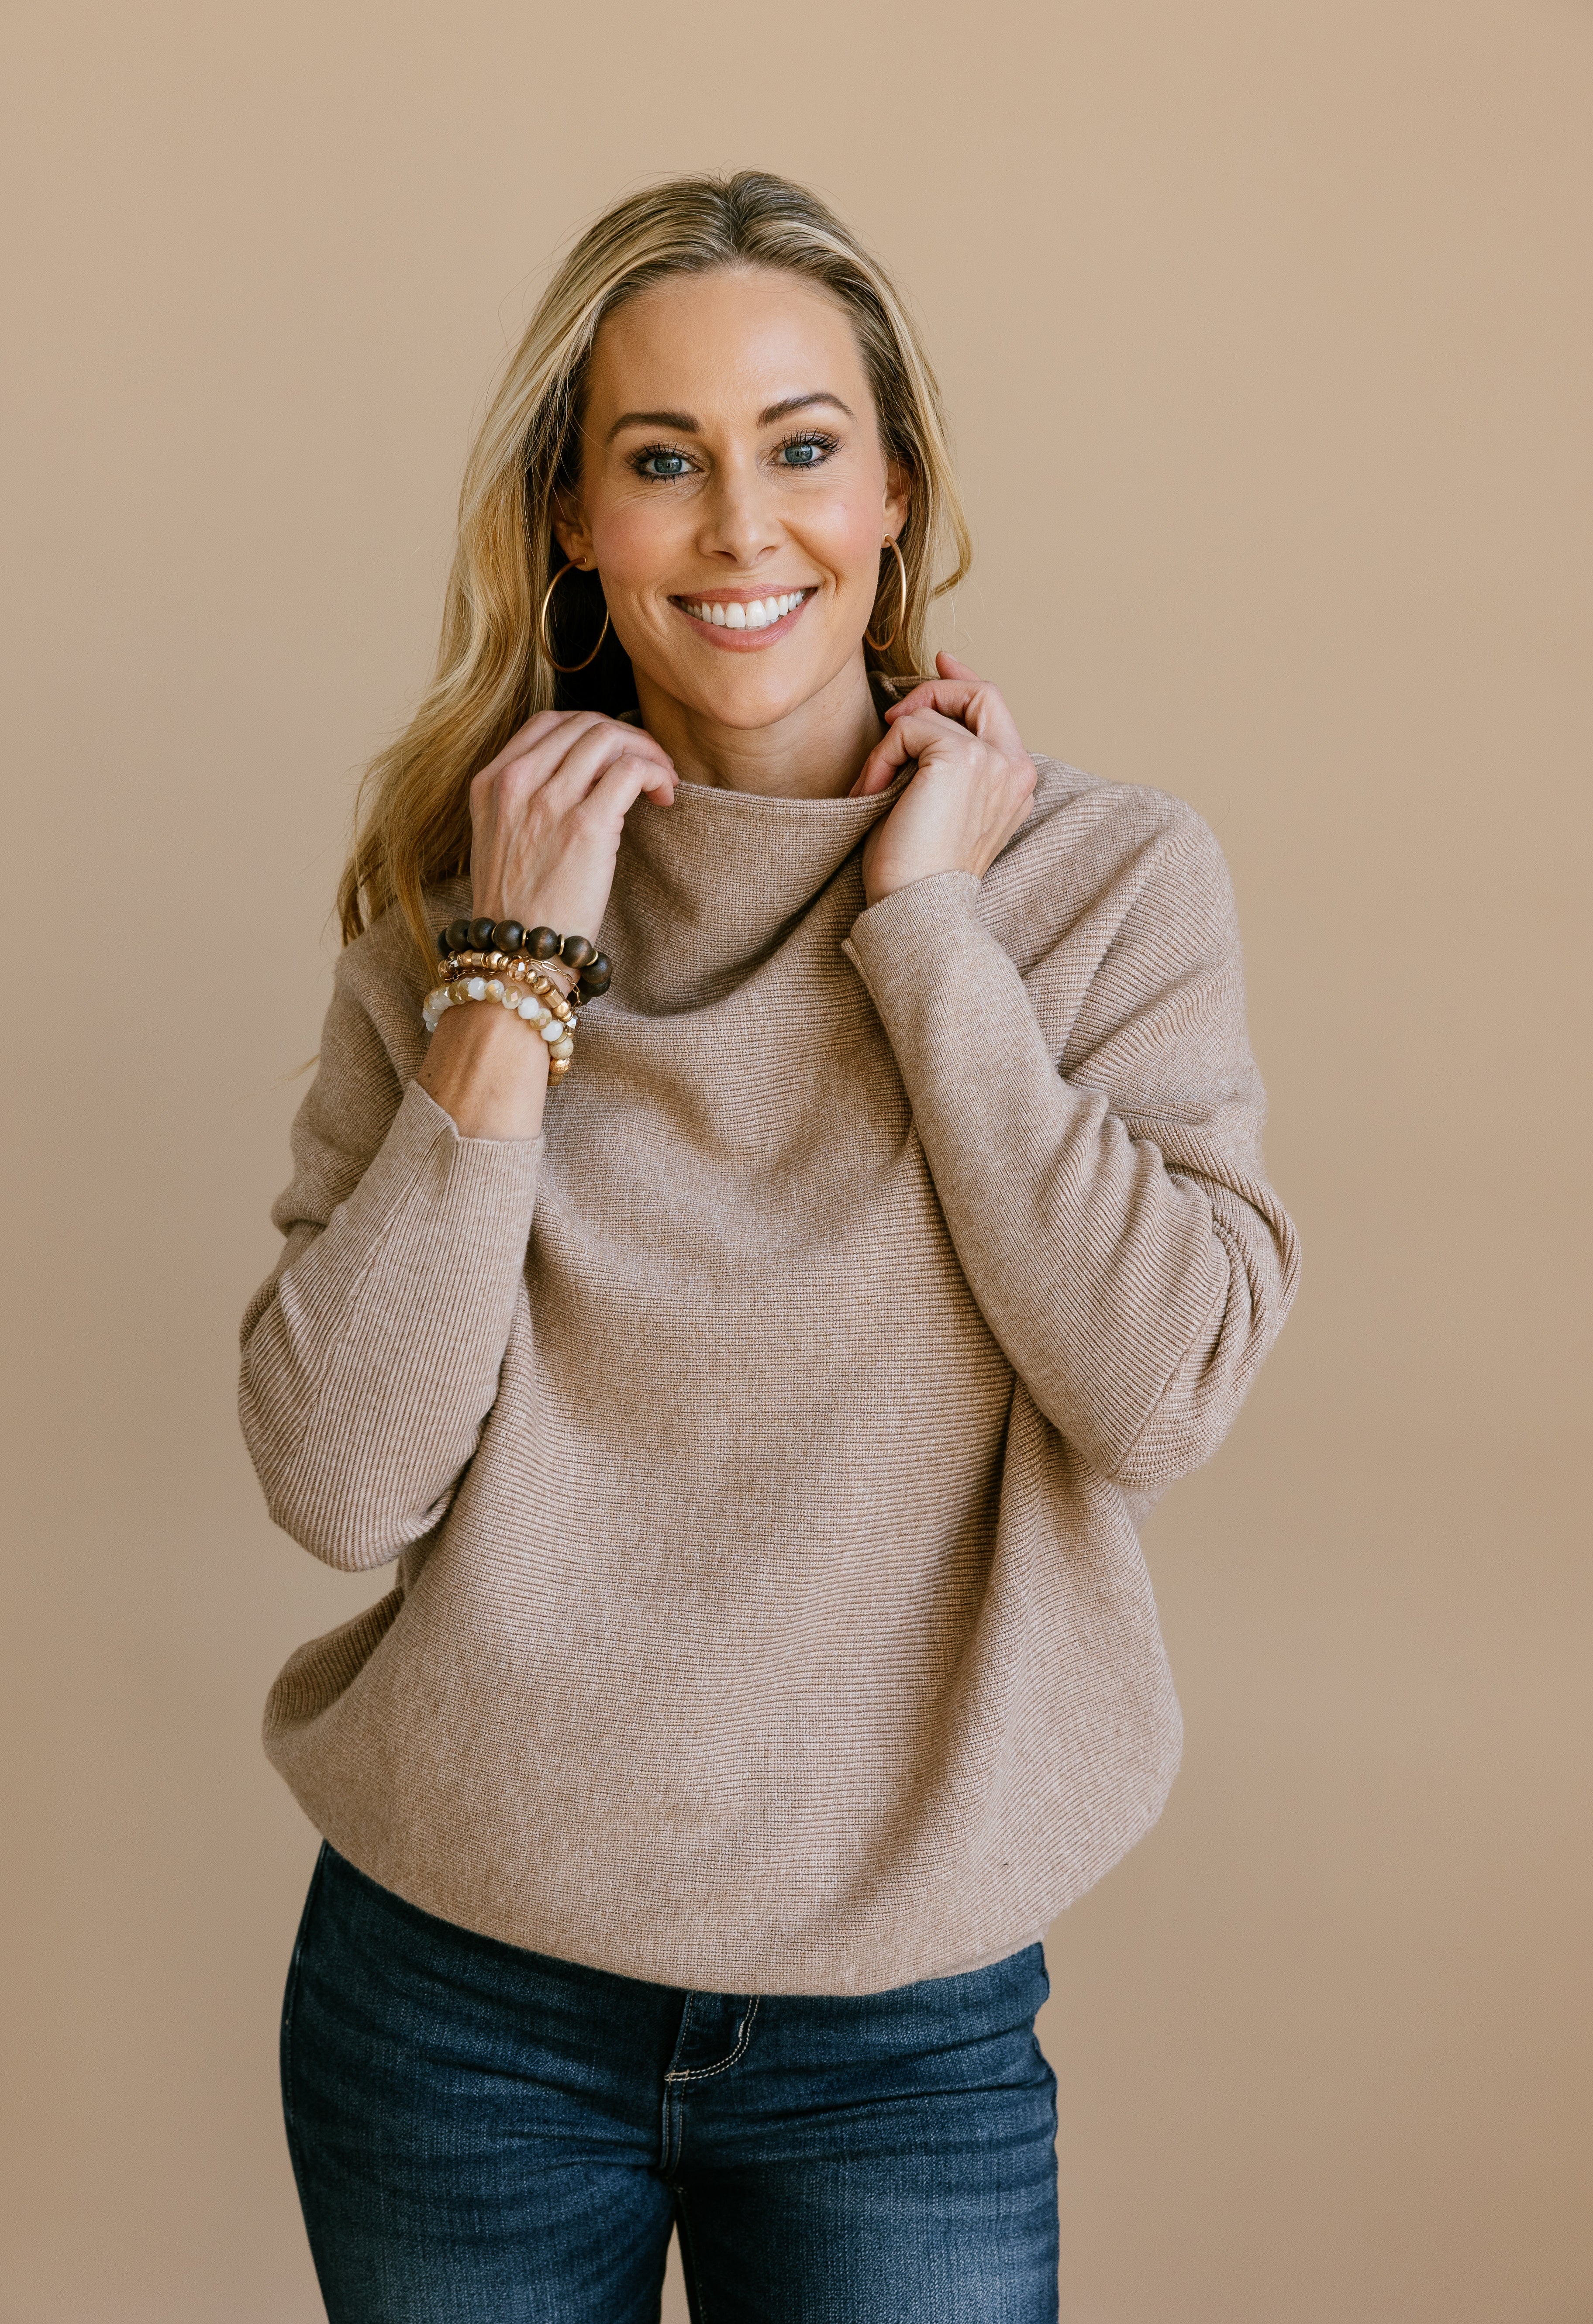 Say Hello Sweater - OATMEAL - willows clothing SWEATER